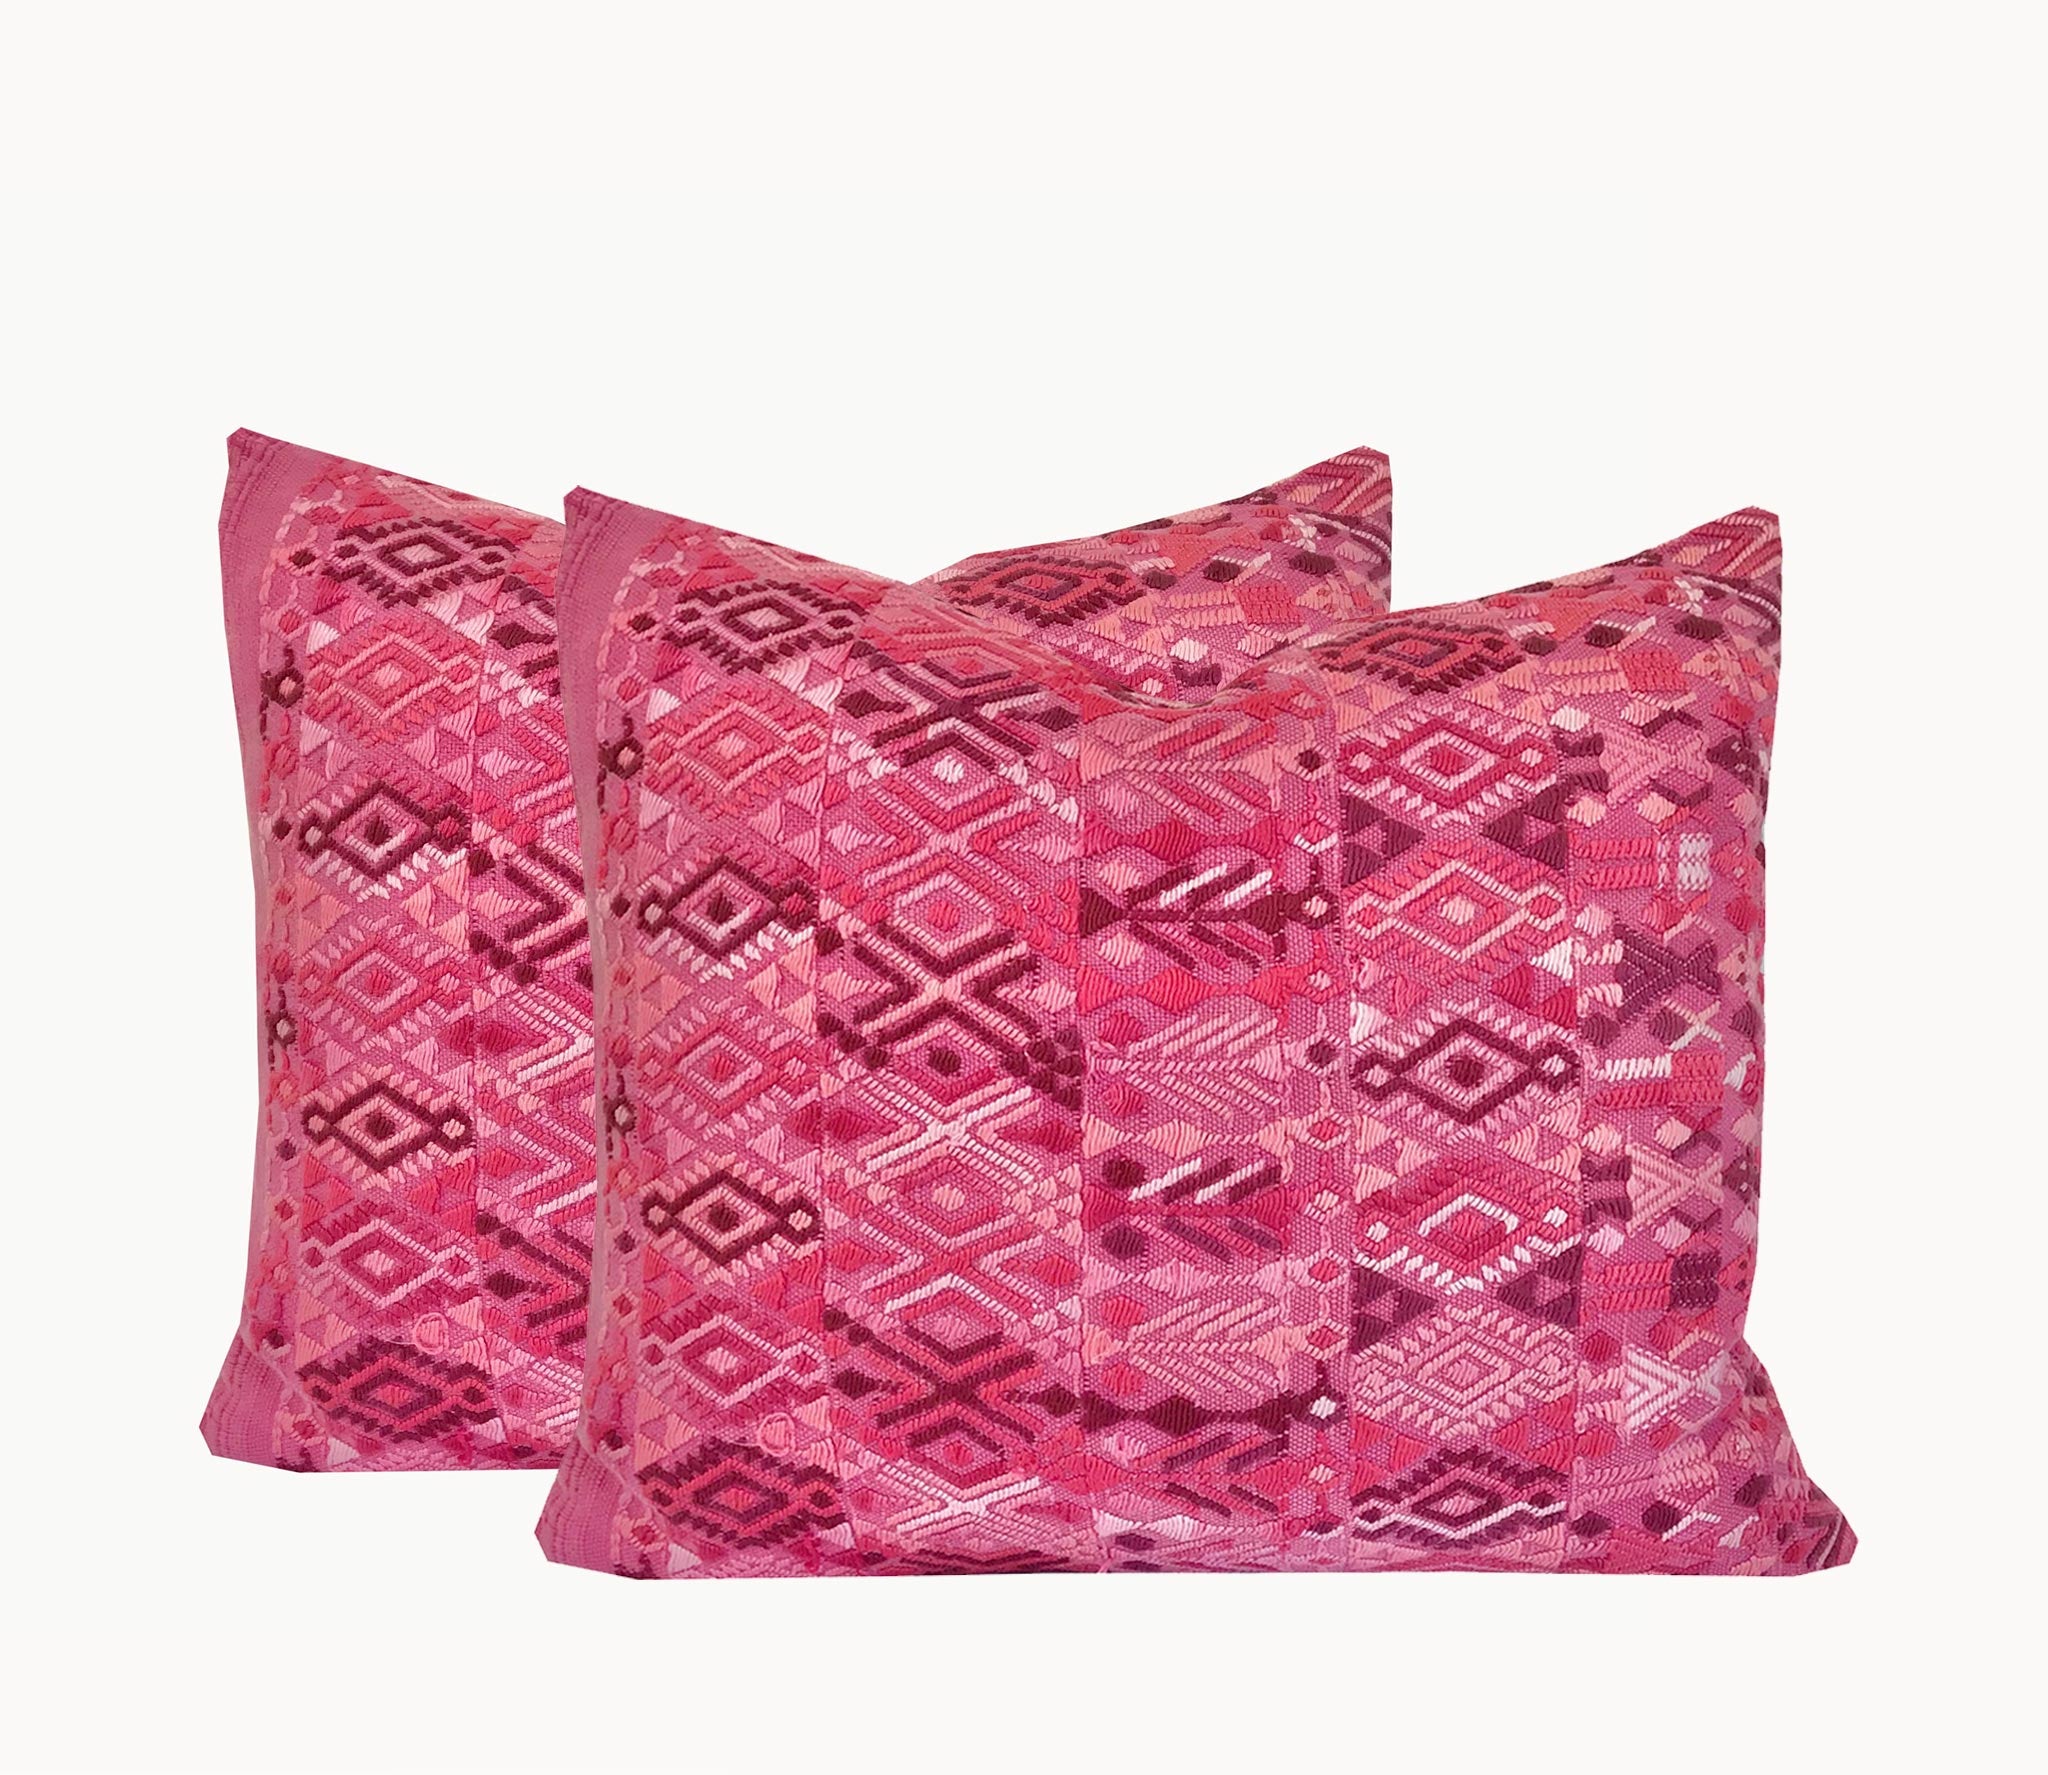 A pair of Guatemalan Huipil Pillows, vintage, hand embroidered textiles in bright pink with a playful tribal design